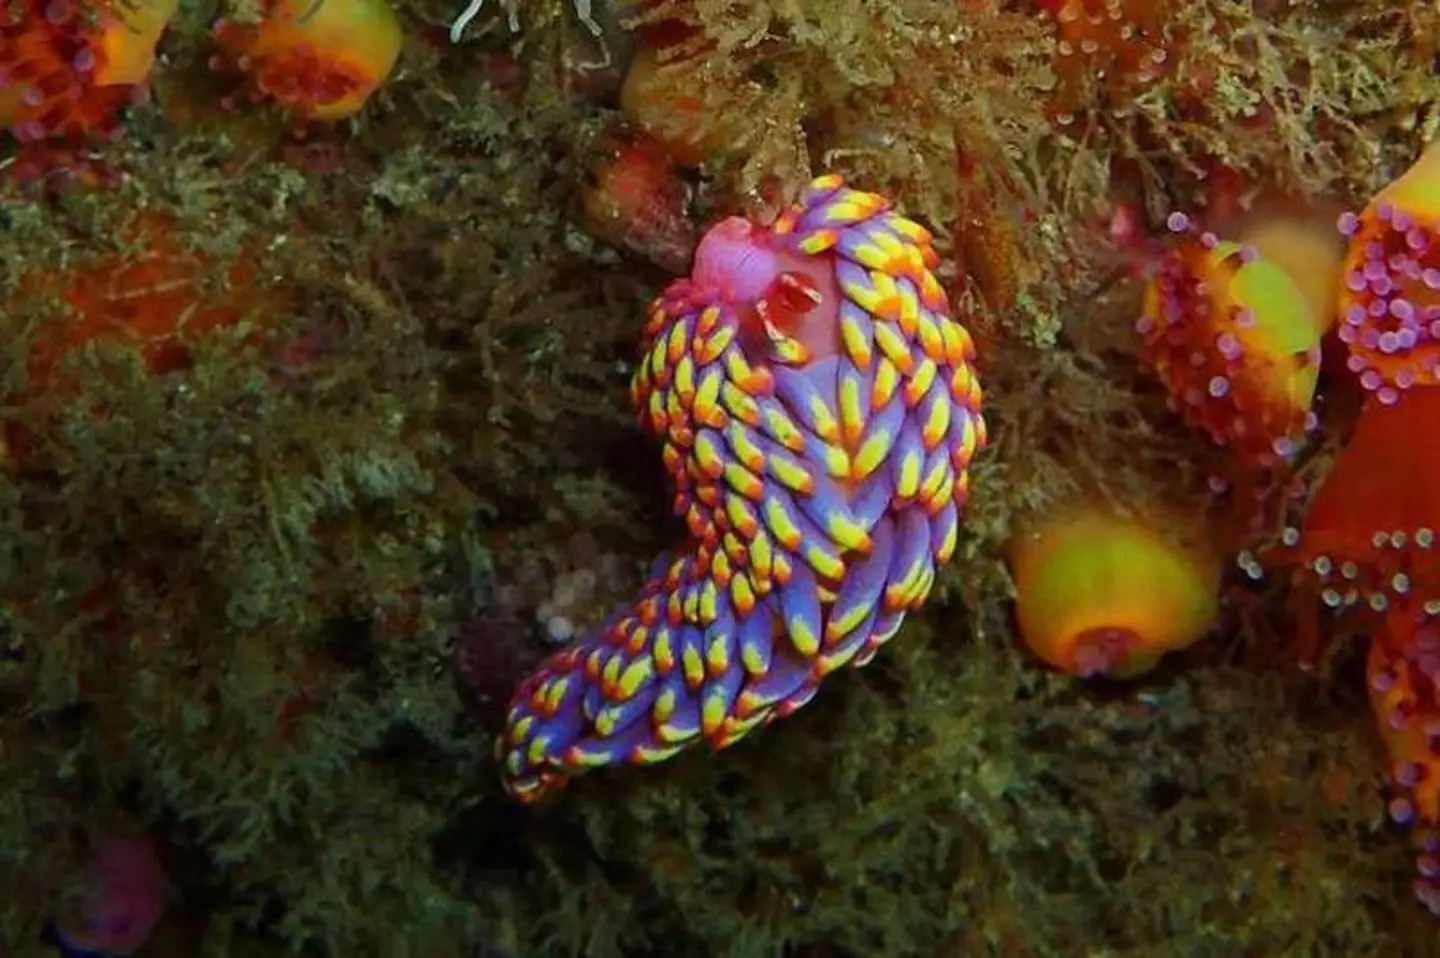 The sea slug was found in waters near the Isles of Scilly.